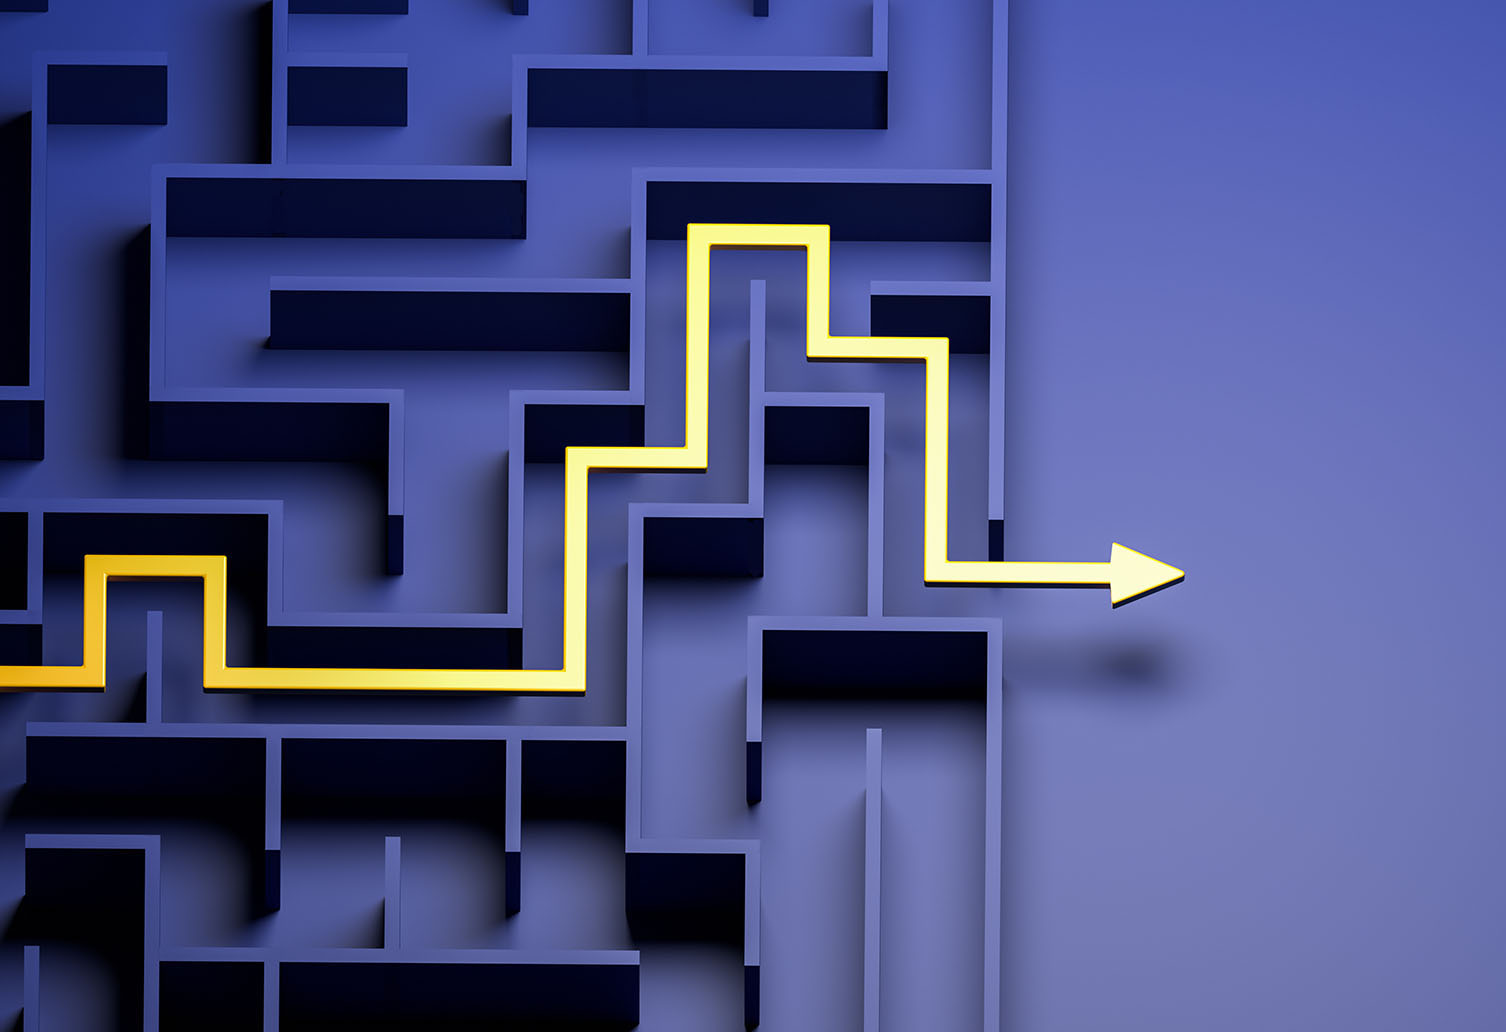 Blue maze and floor with yellow solution path with arrow.